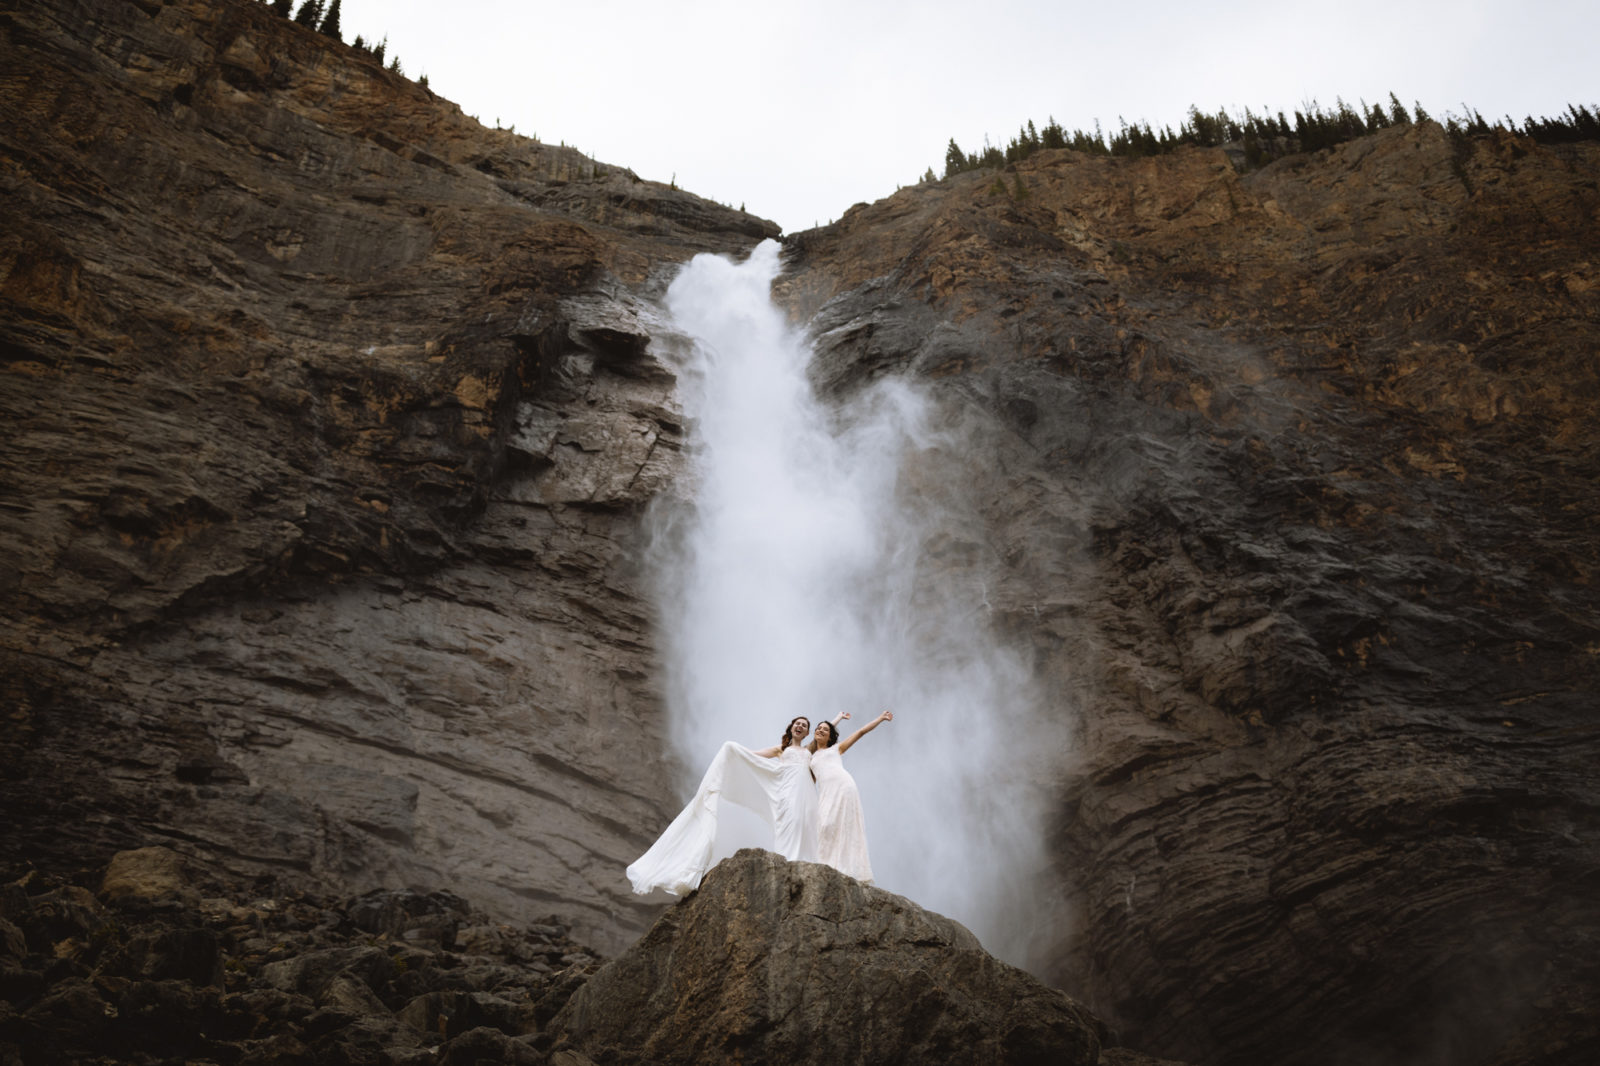 Newly wed brides strike a pose in front of Tawakkawa Falls in Yoho National Park